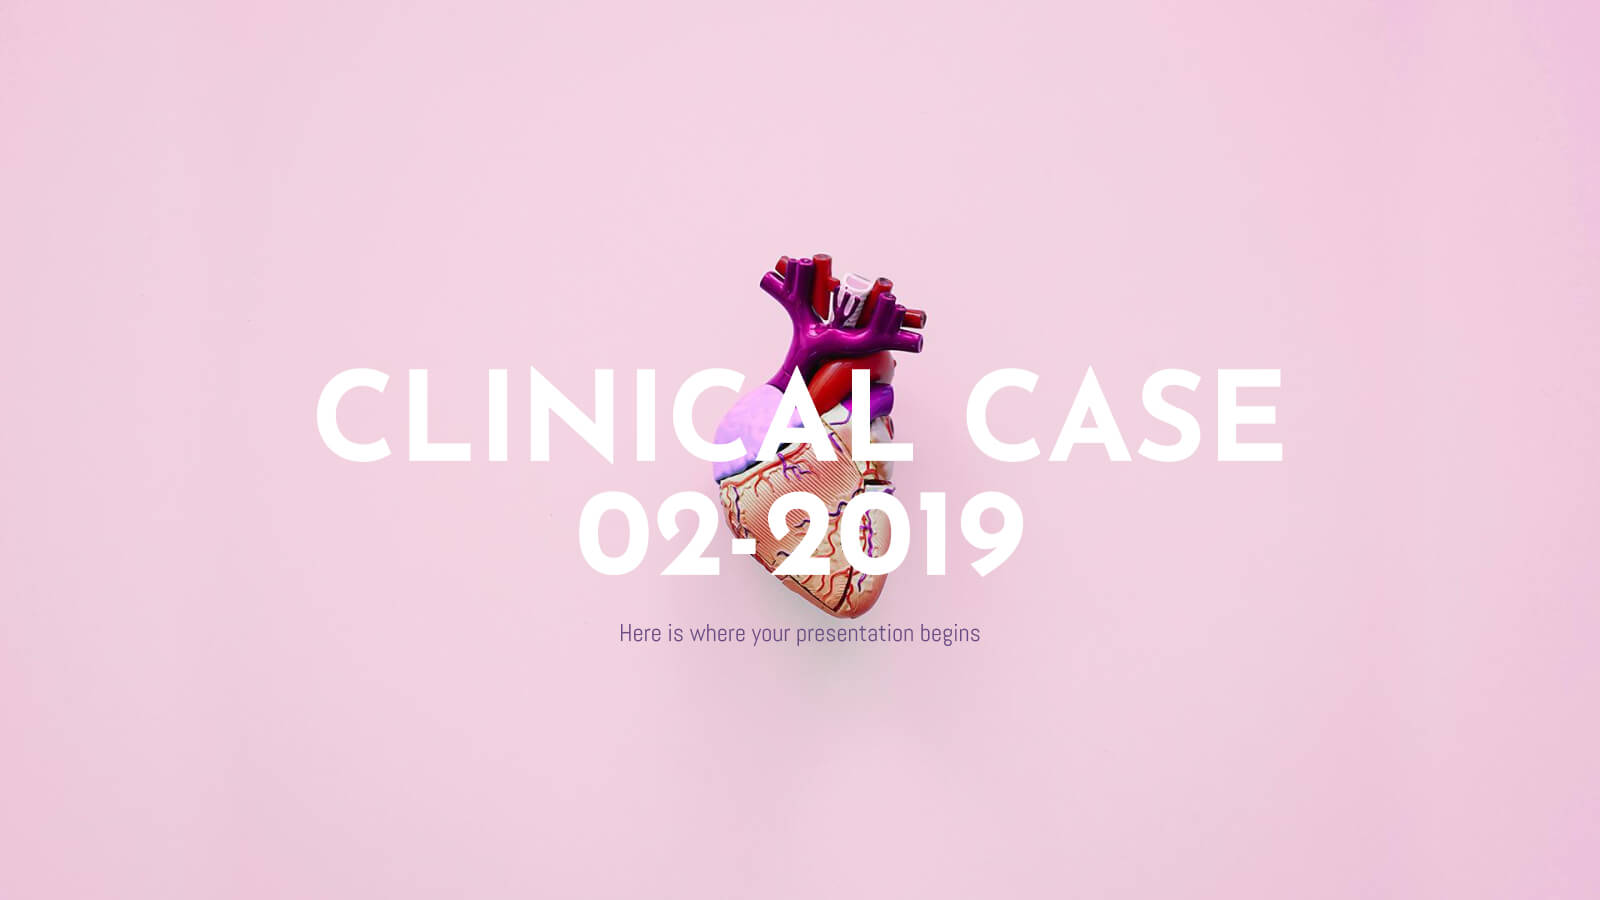 Clinical Case 02 2019 - Free Presentation Template For Within Case Presentation Template